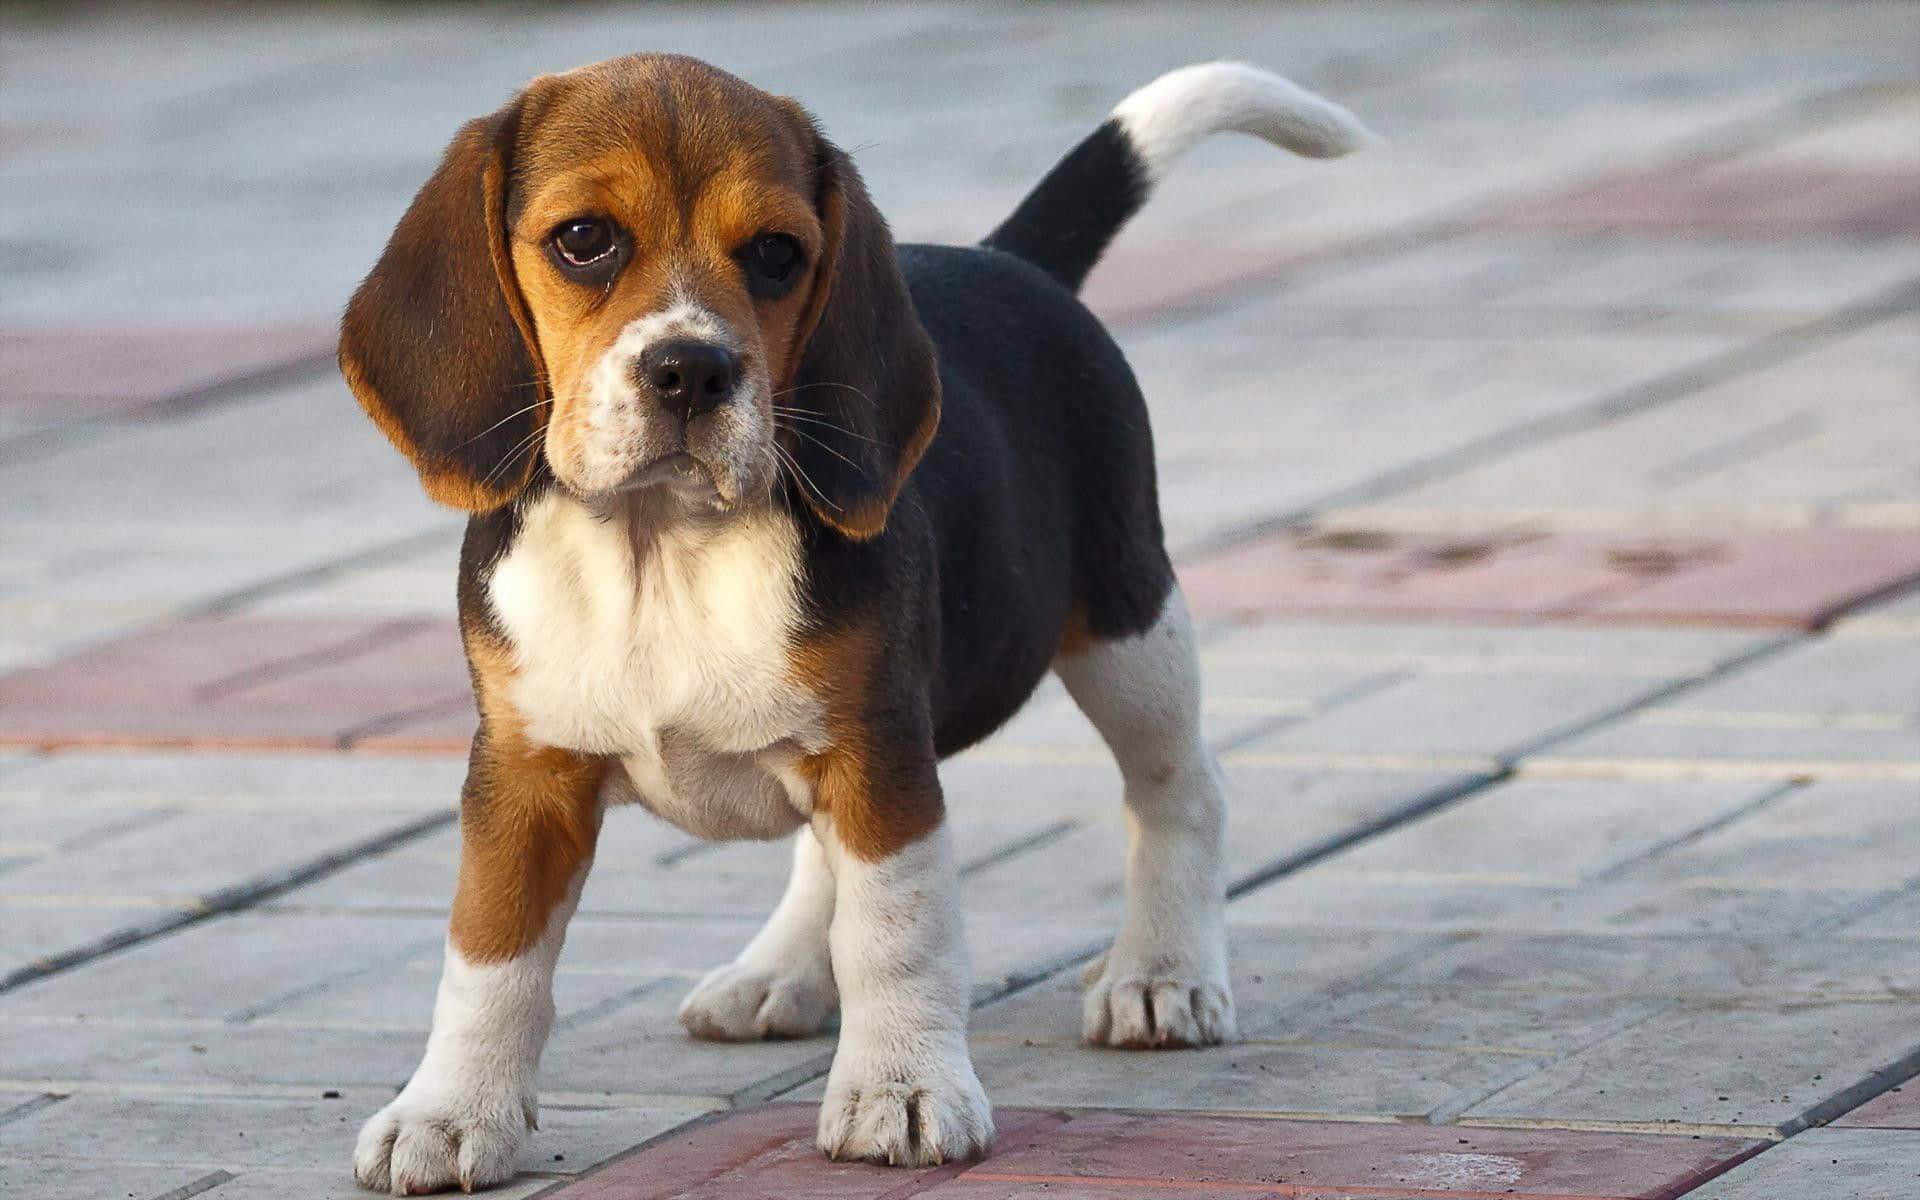 Adorable beagle dog with its floppy ears